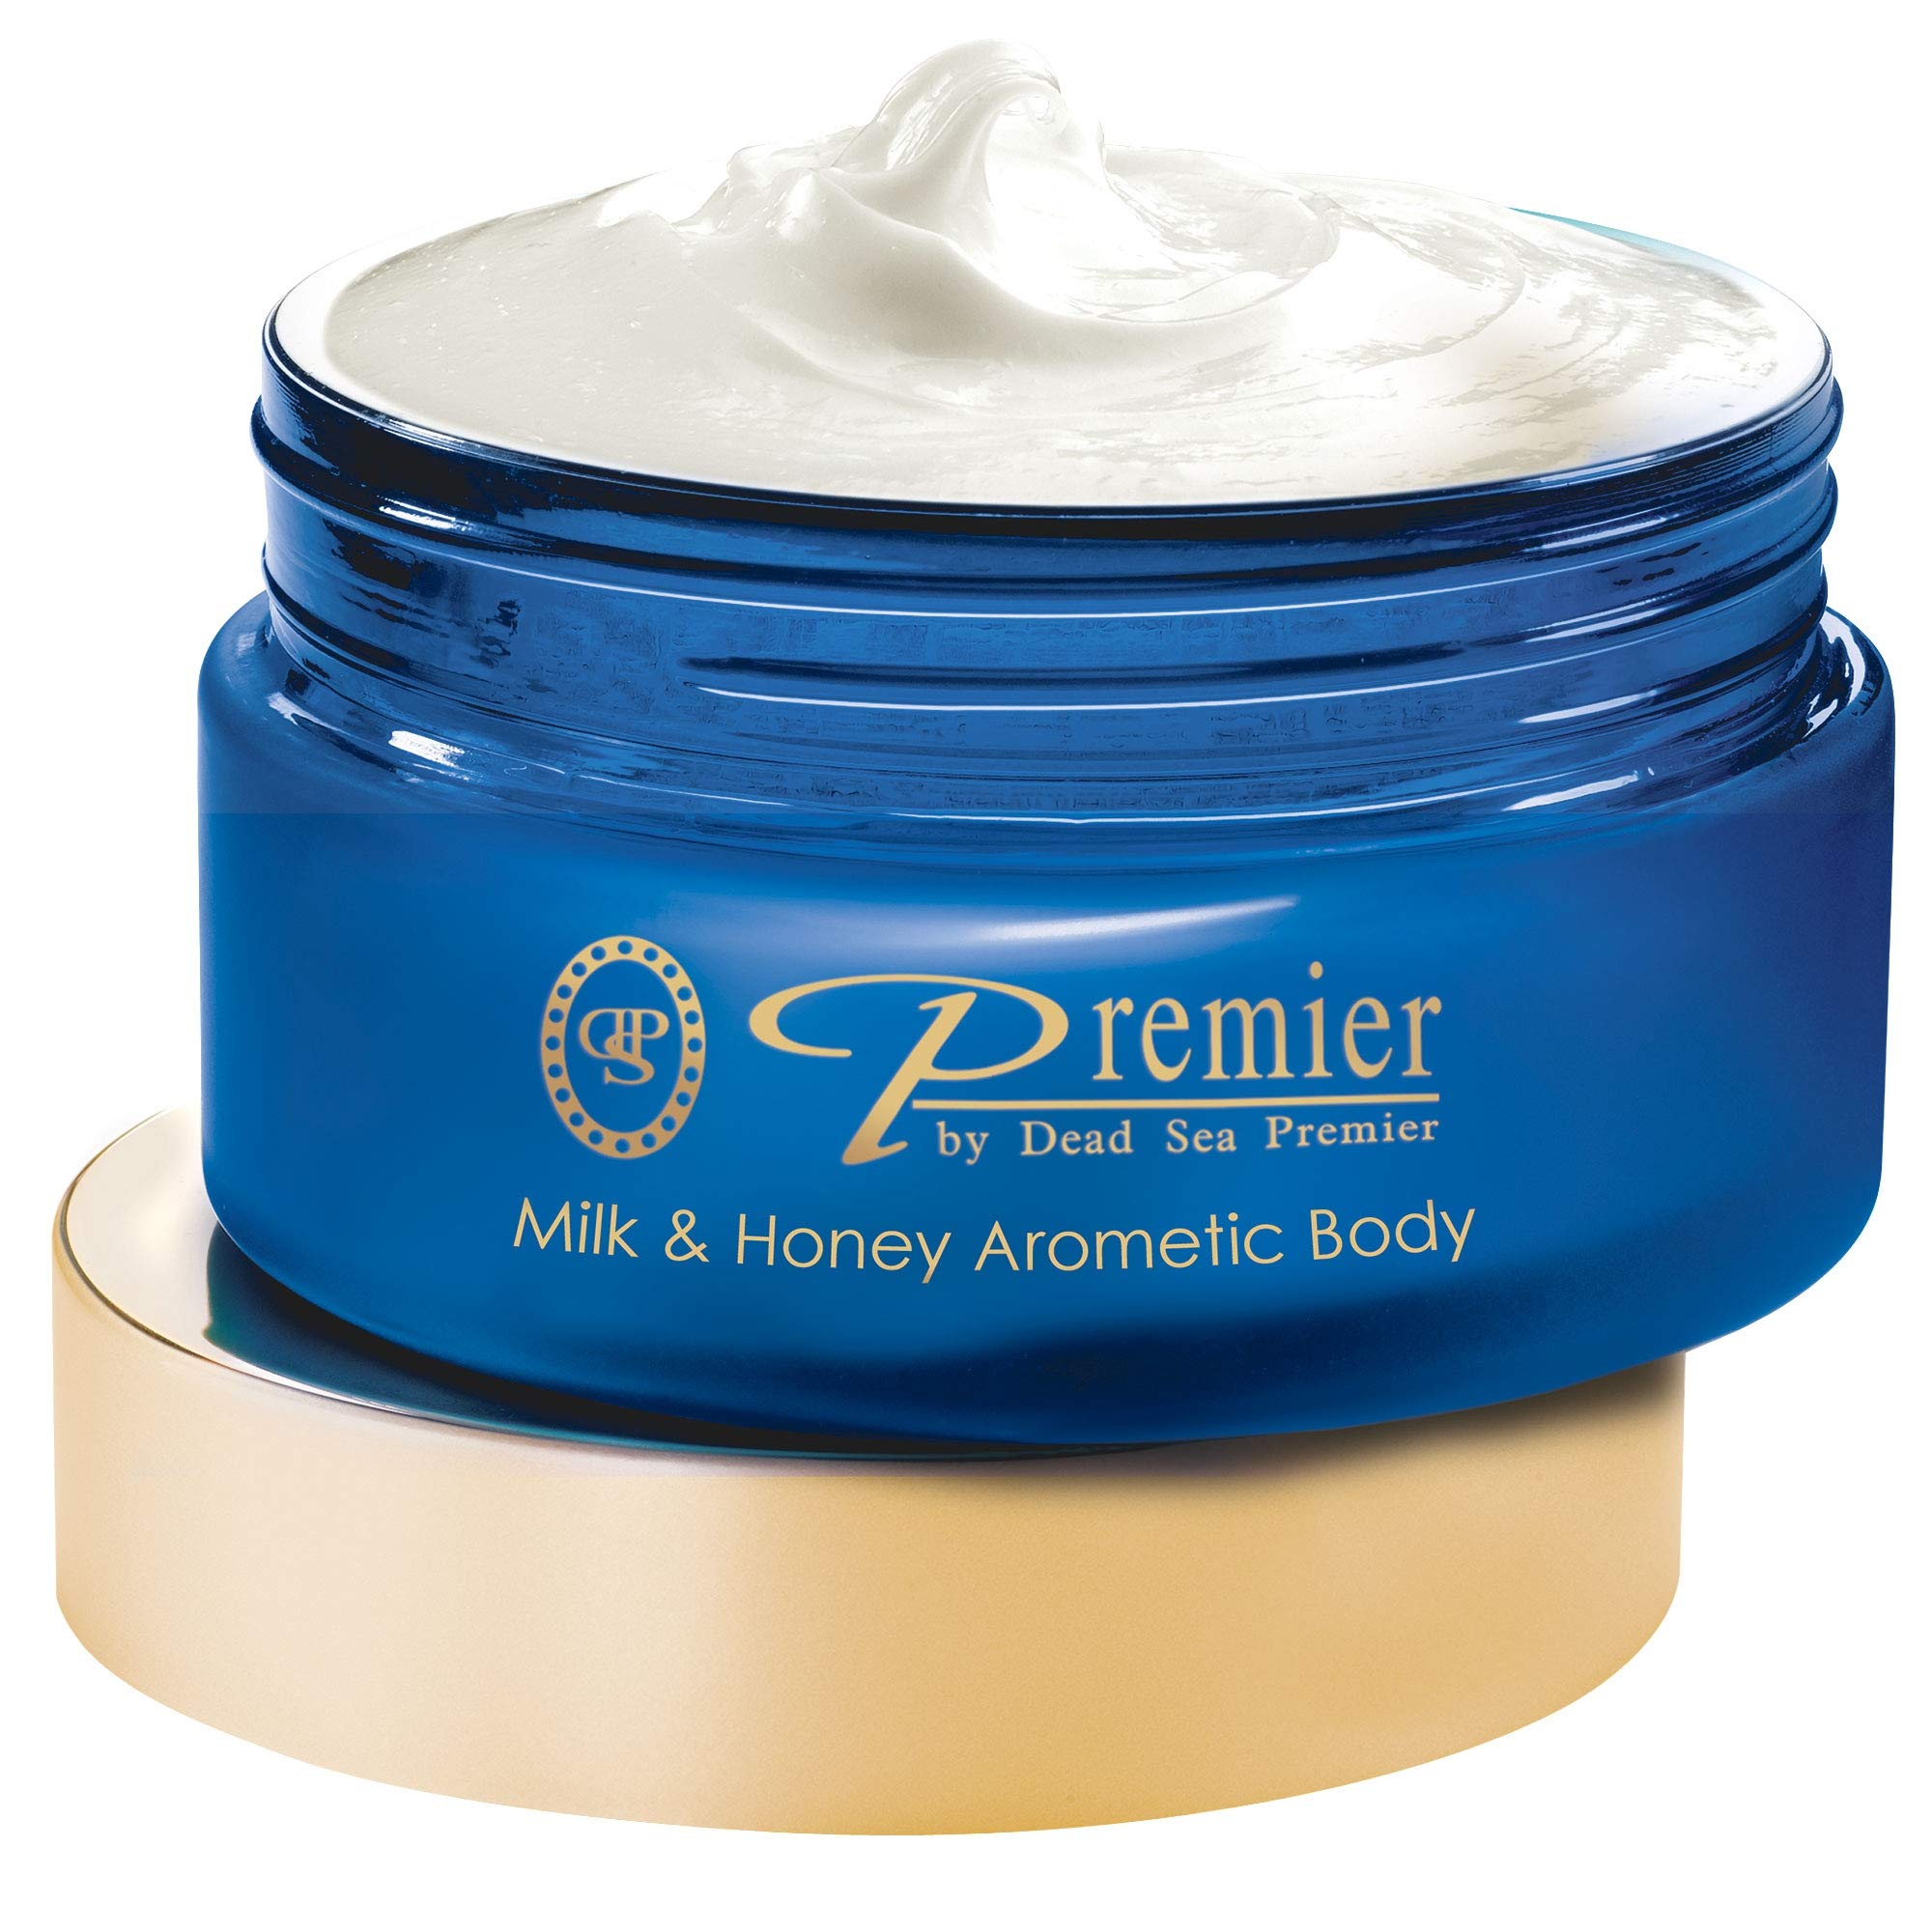 Premier Dead Sea Aromatic Body Butter- Milk and Honey, minerals, anti aging, firming, skin tone, age spots, Neck & Décolleté, Lightweight, and Long-Lasting Nourishmentl, silky, non tacky 5.95Fl.oz